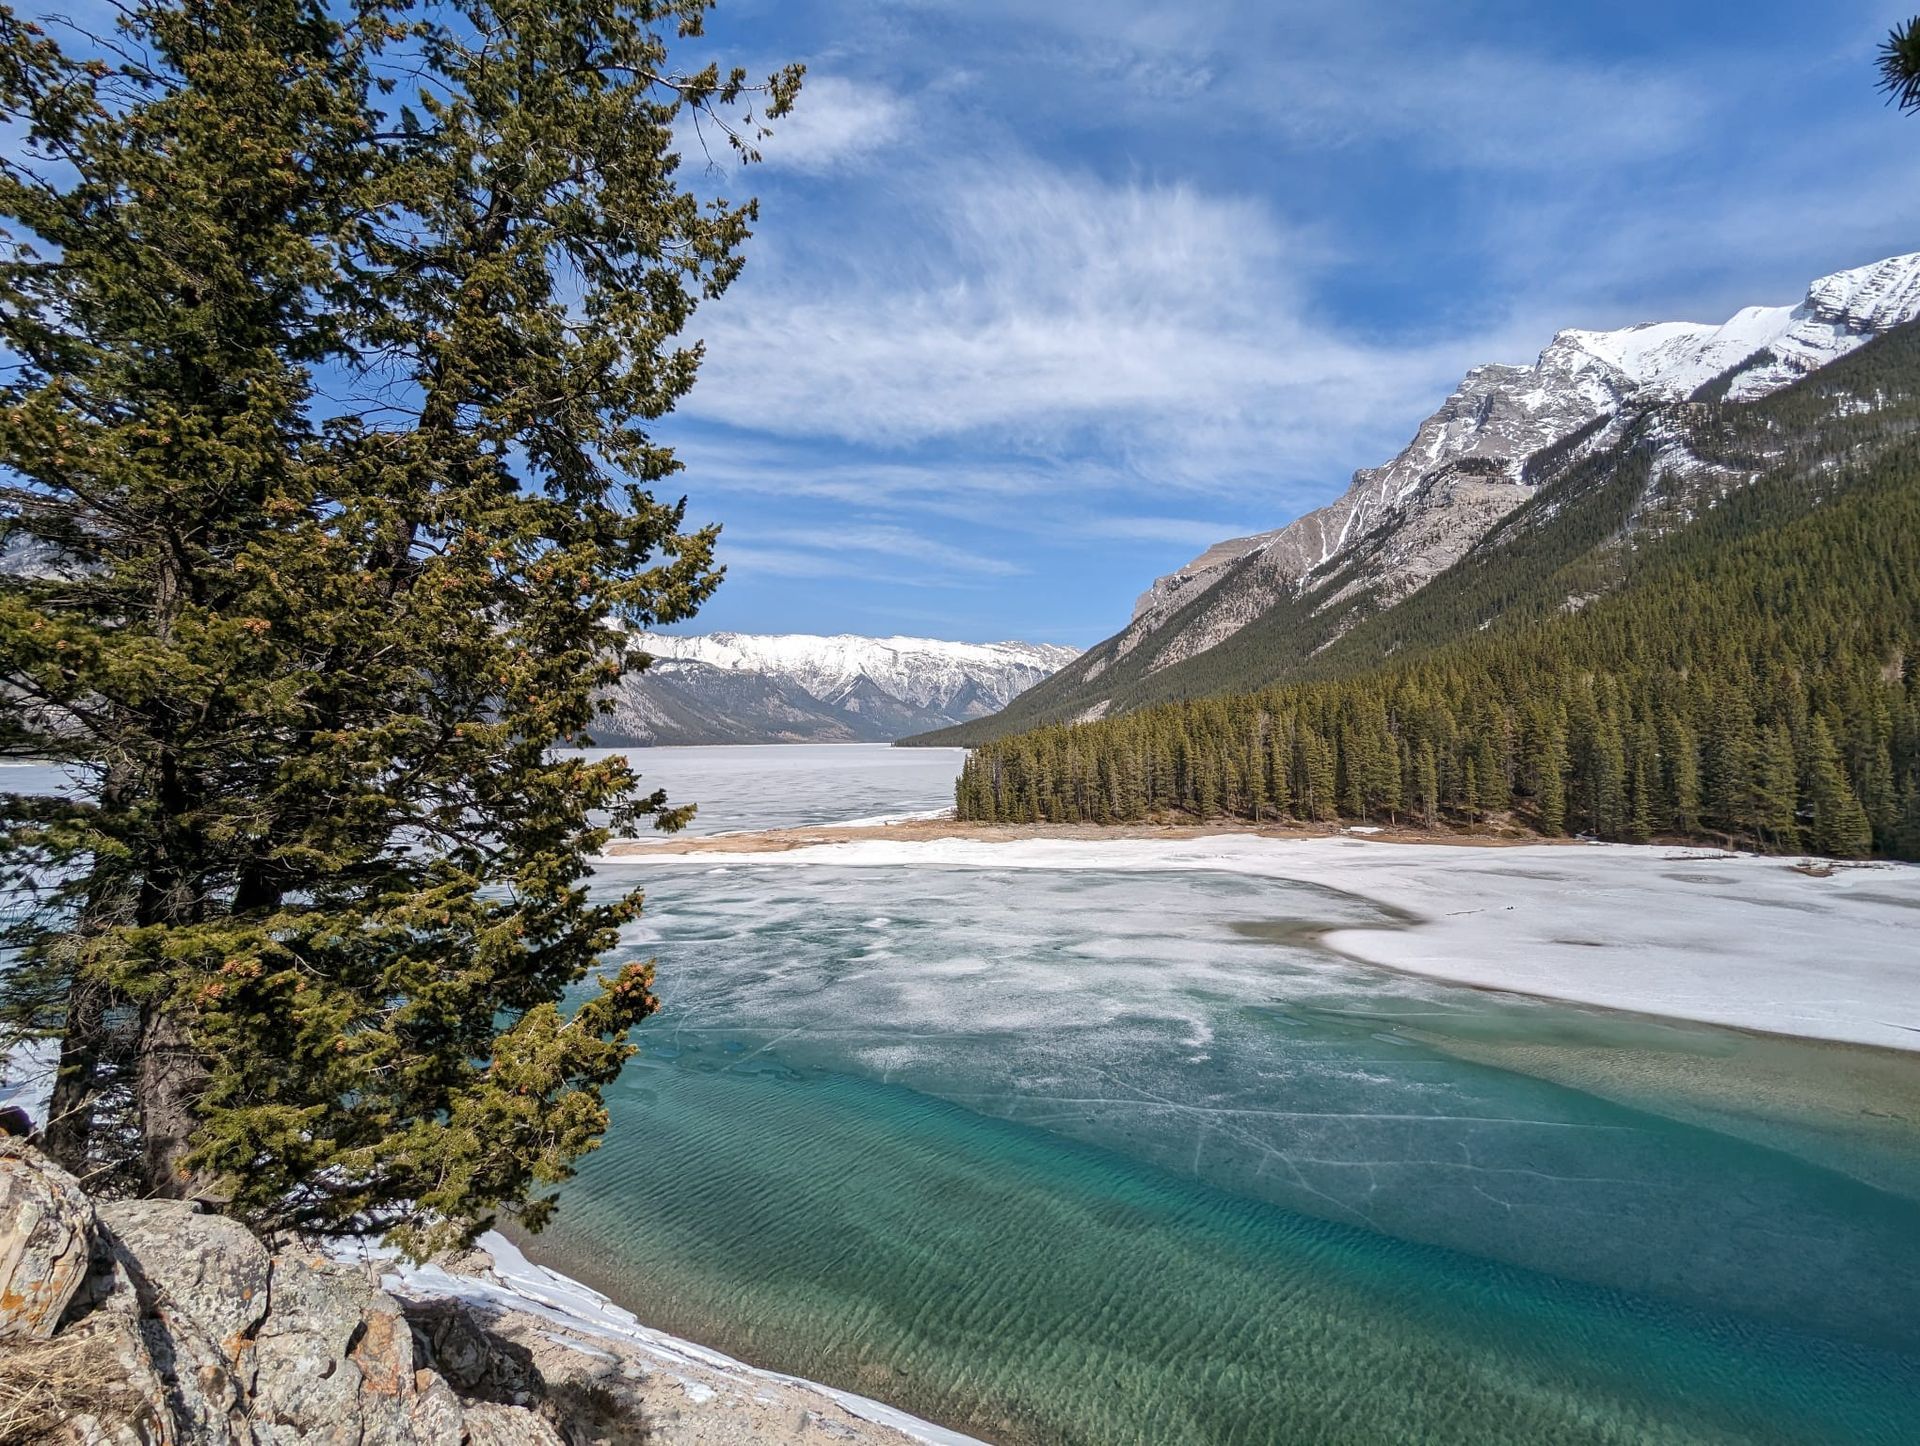 An image of the mountains at Banff, with the frozen river starting to melt and the blue pop.